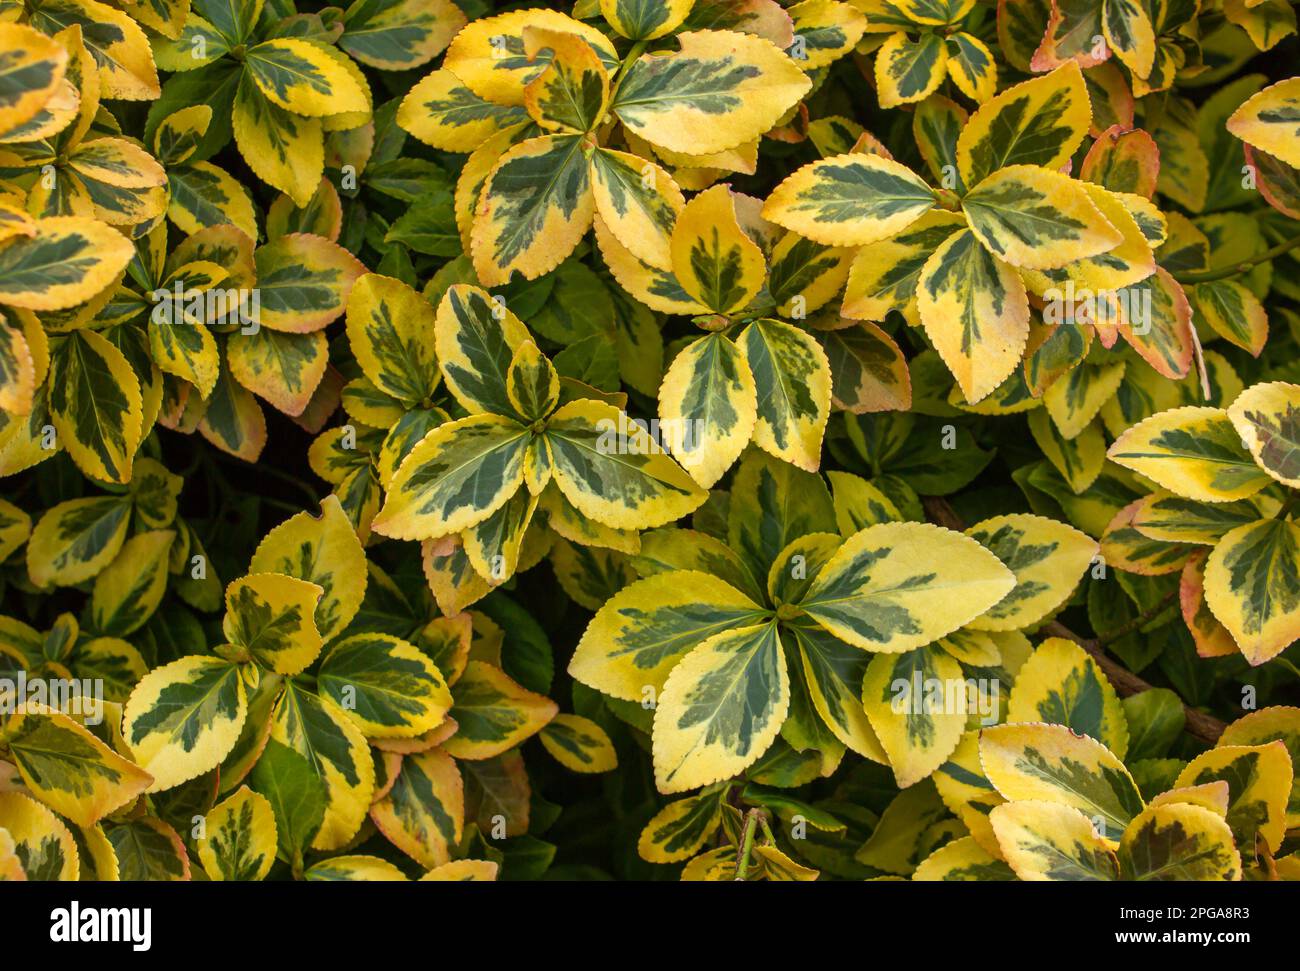 Euonymus fortunei emeralnd n gold cultivar leaves, yellow and green leaf, ornamental branches, foliage background. Fortunes spindle evergreen shrub cl Stock Photo